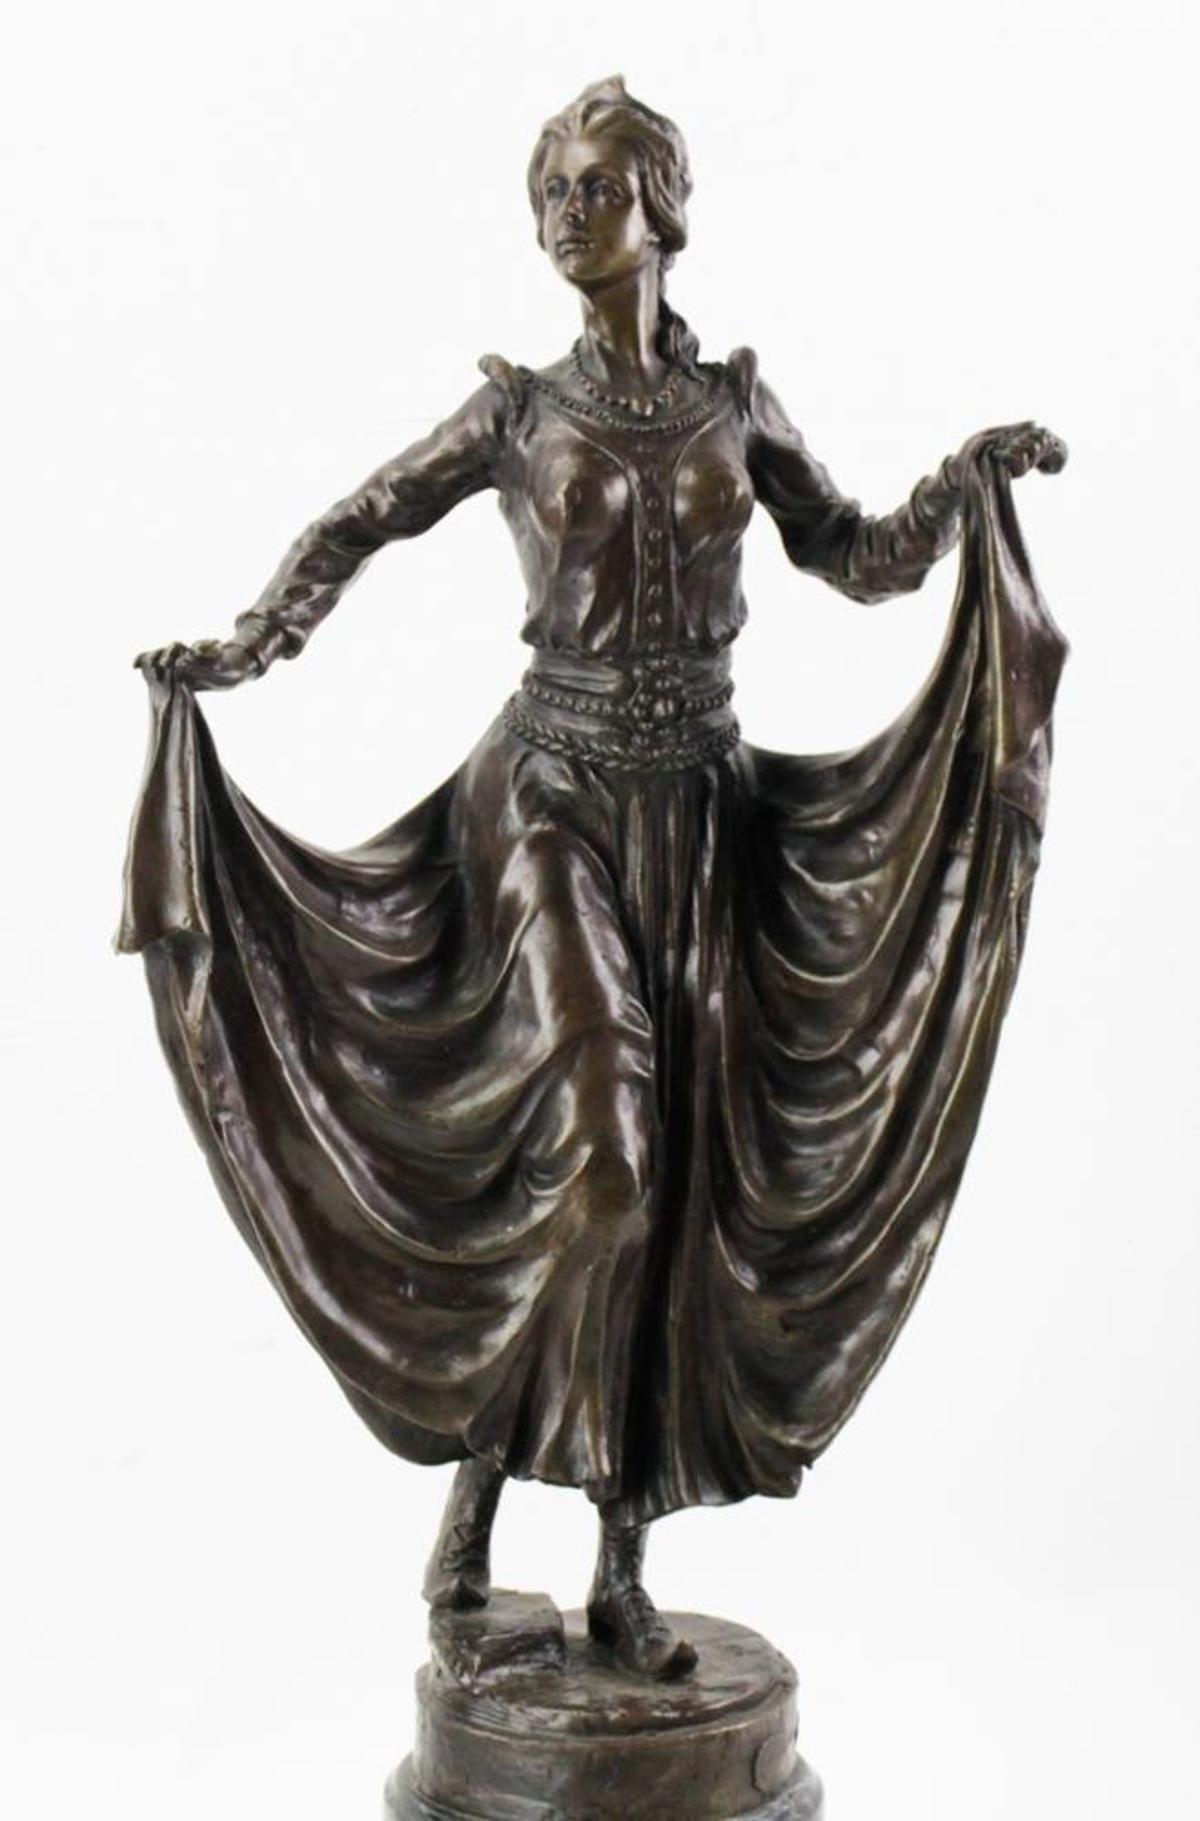 Graceful Art Deco sculpture depicting a female dancer standing on a black marble base. Made with quality bronze, the statue showcases the women wearing long skirts and traditional shoes. Made in France in the 1920's.
Dimensions:
24